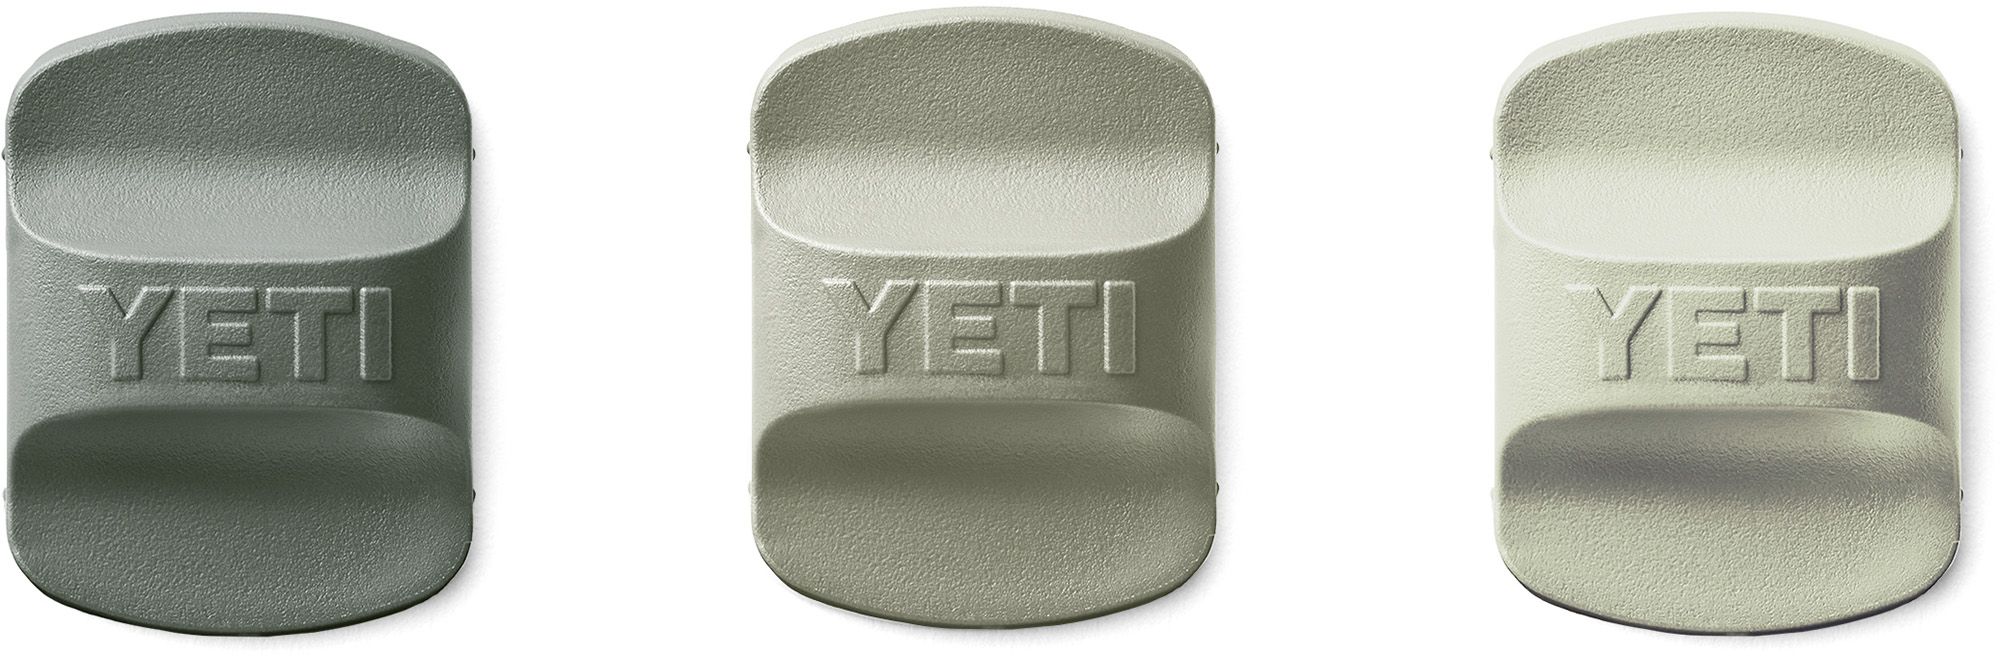 YETI 21071502026 RAMBLER® 18 OZ WATER BOTTLE WITH COLOR-MATCHED STRAW CAP